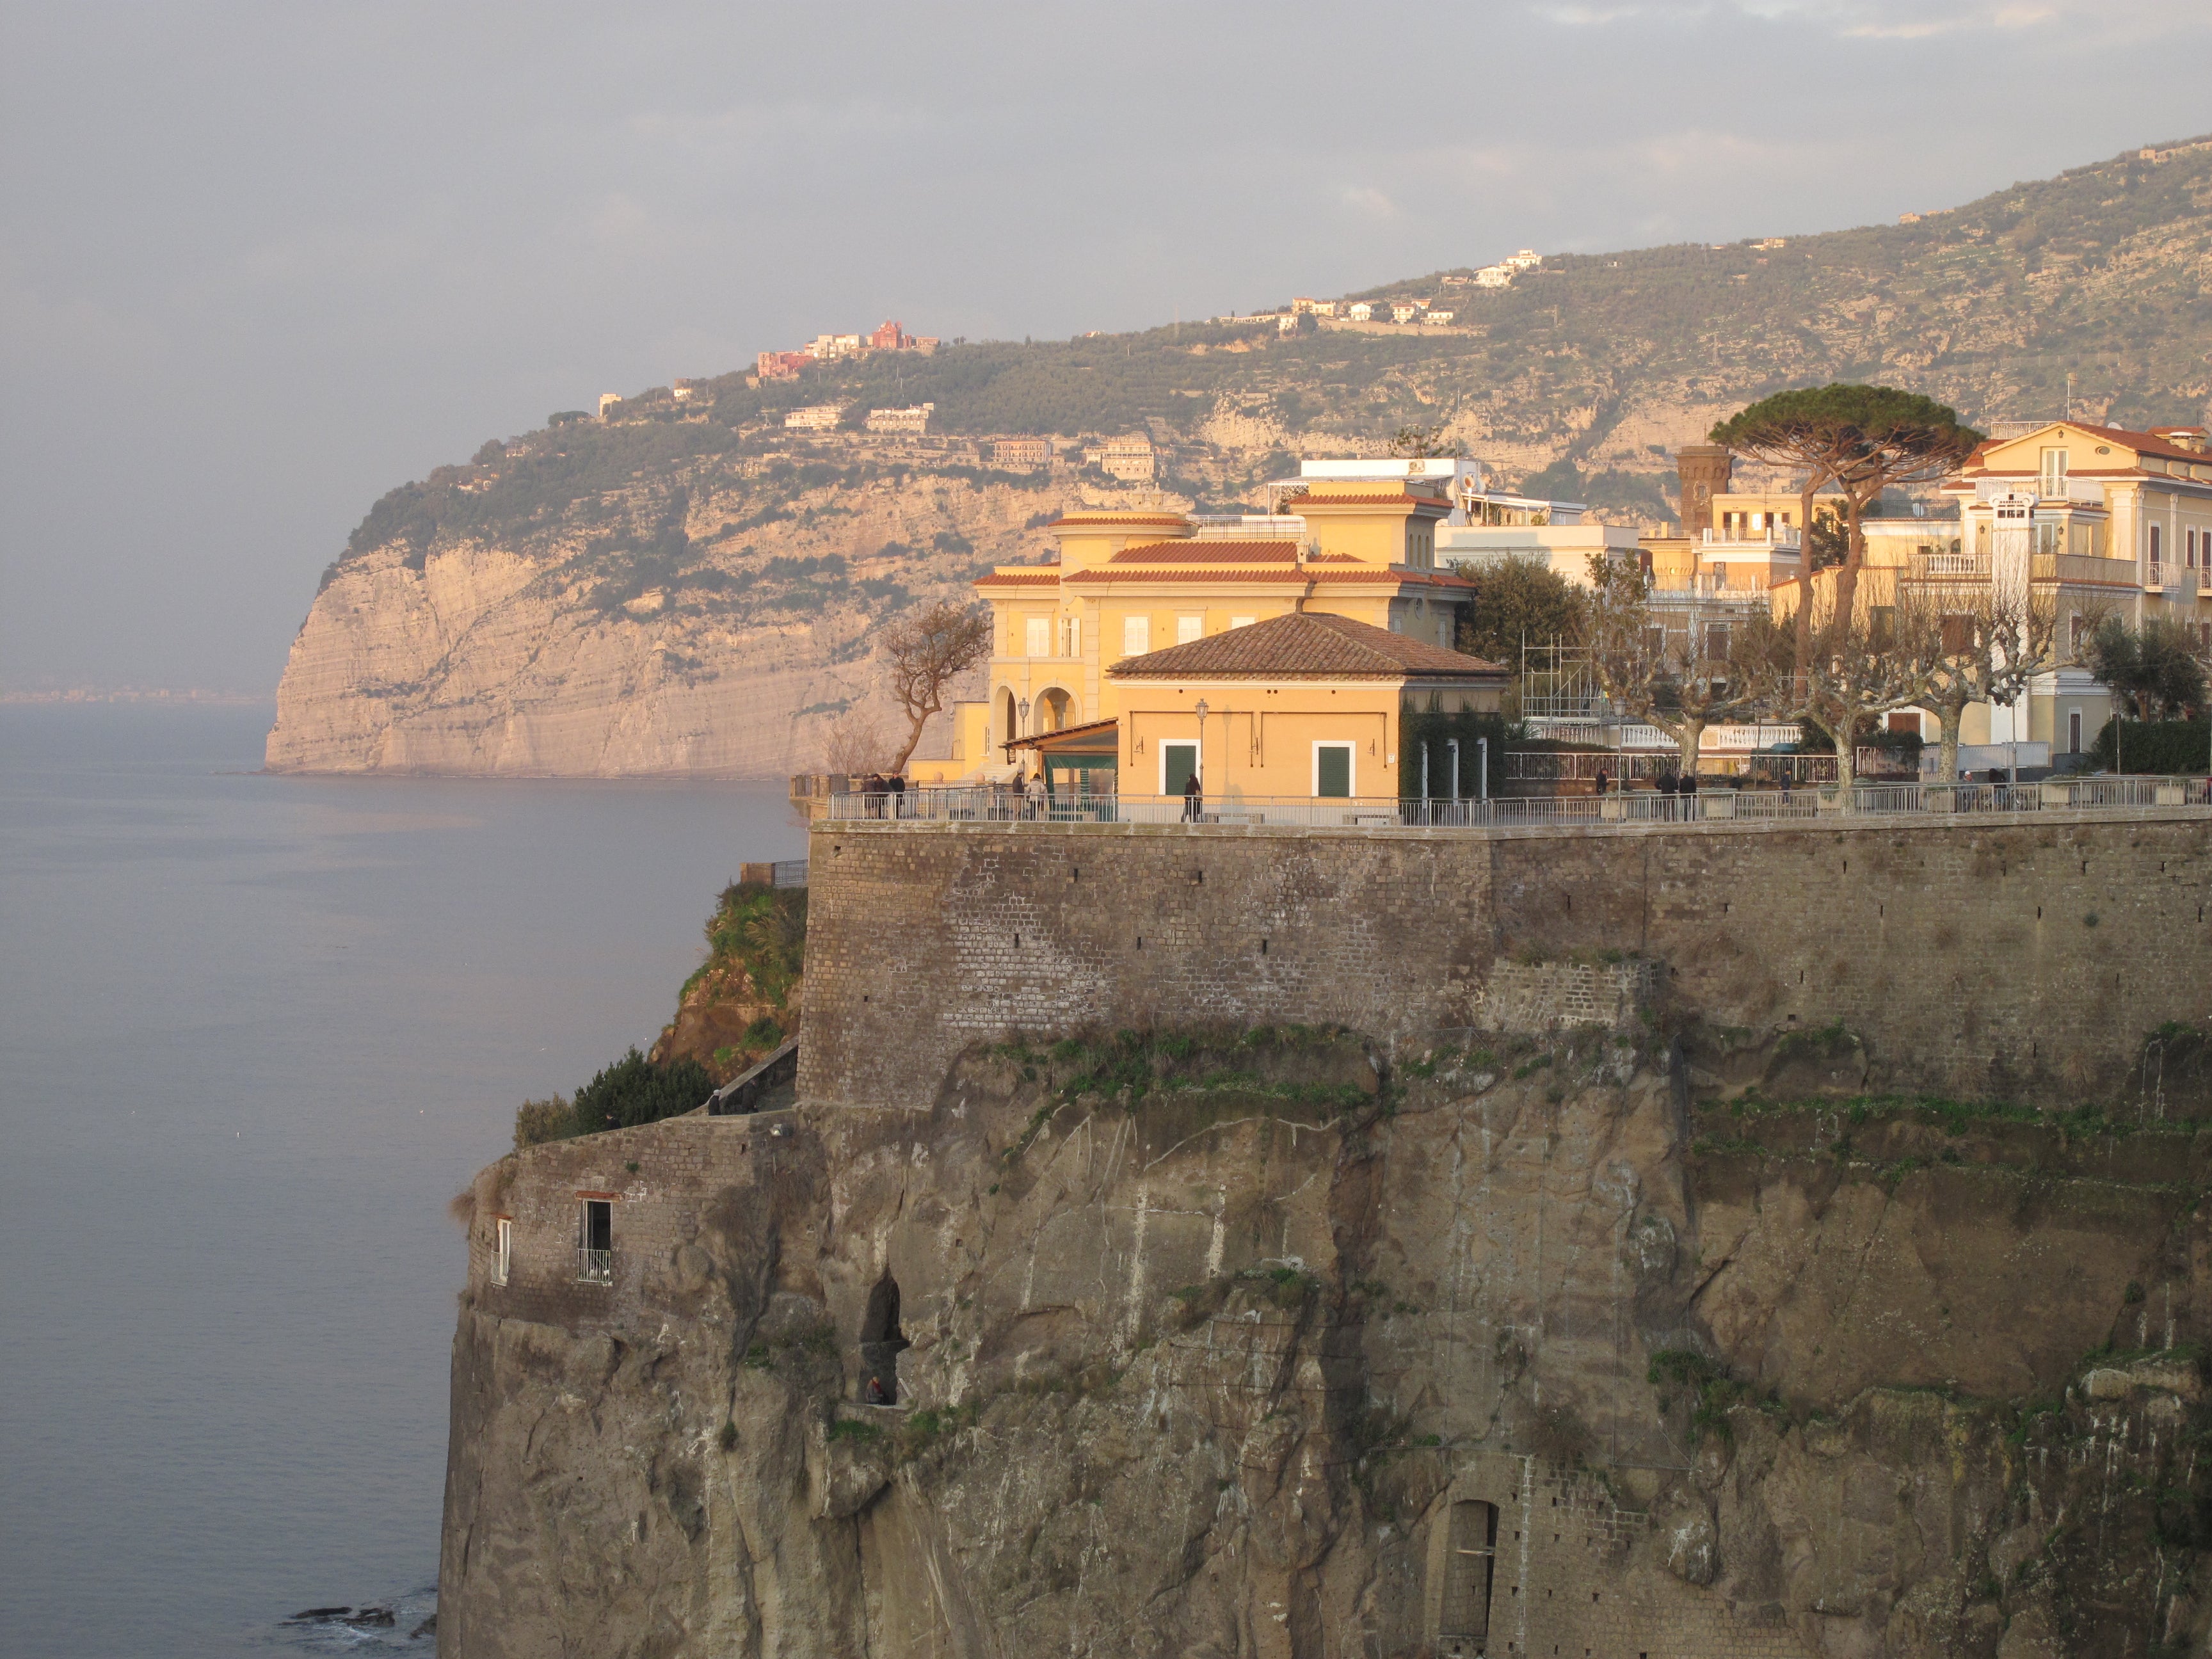 Distant dream: Sorrento and the Bay of Naples